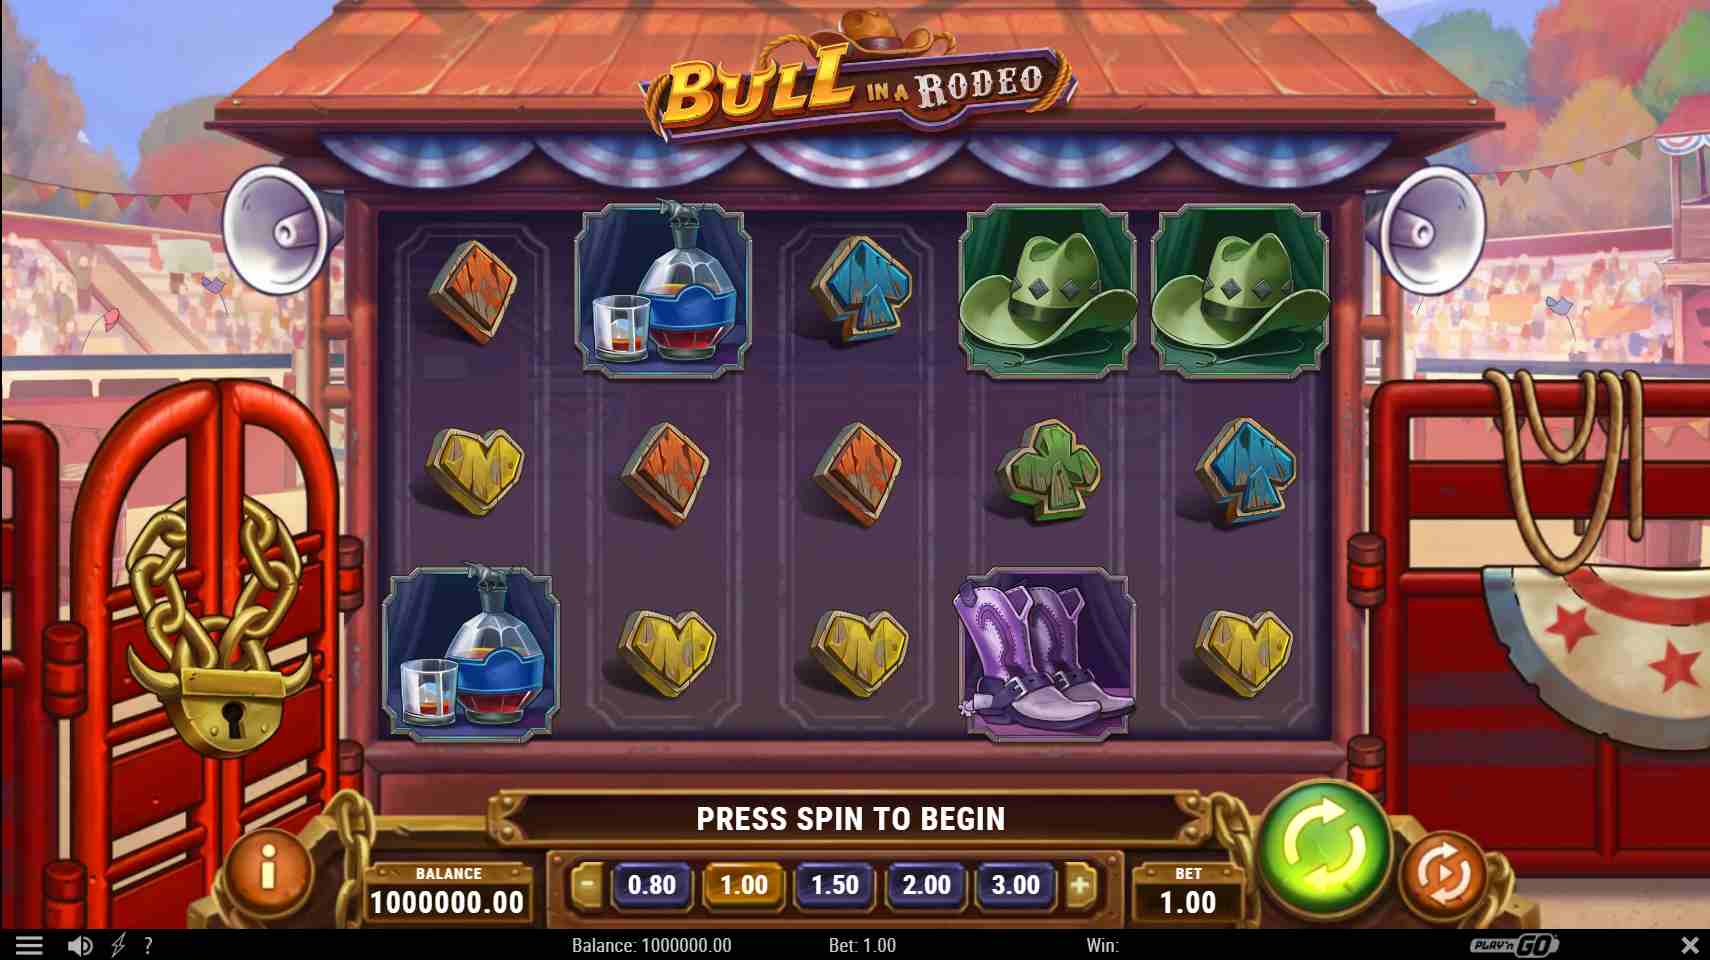 Bull in a Rodeo Base Game